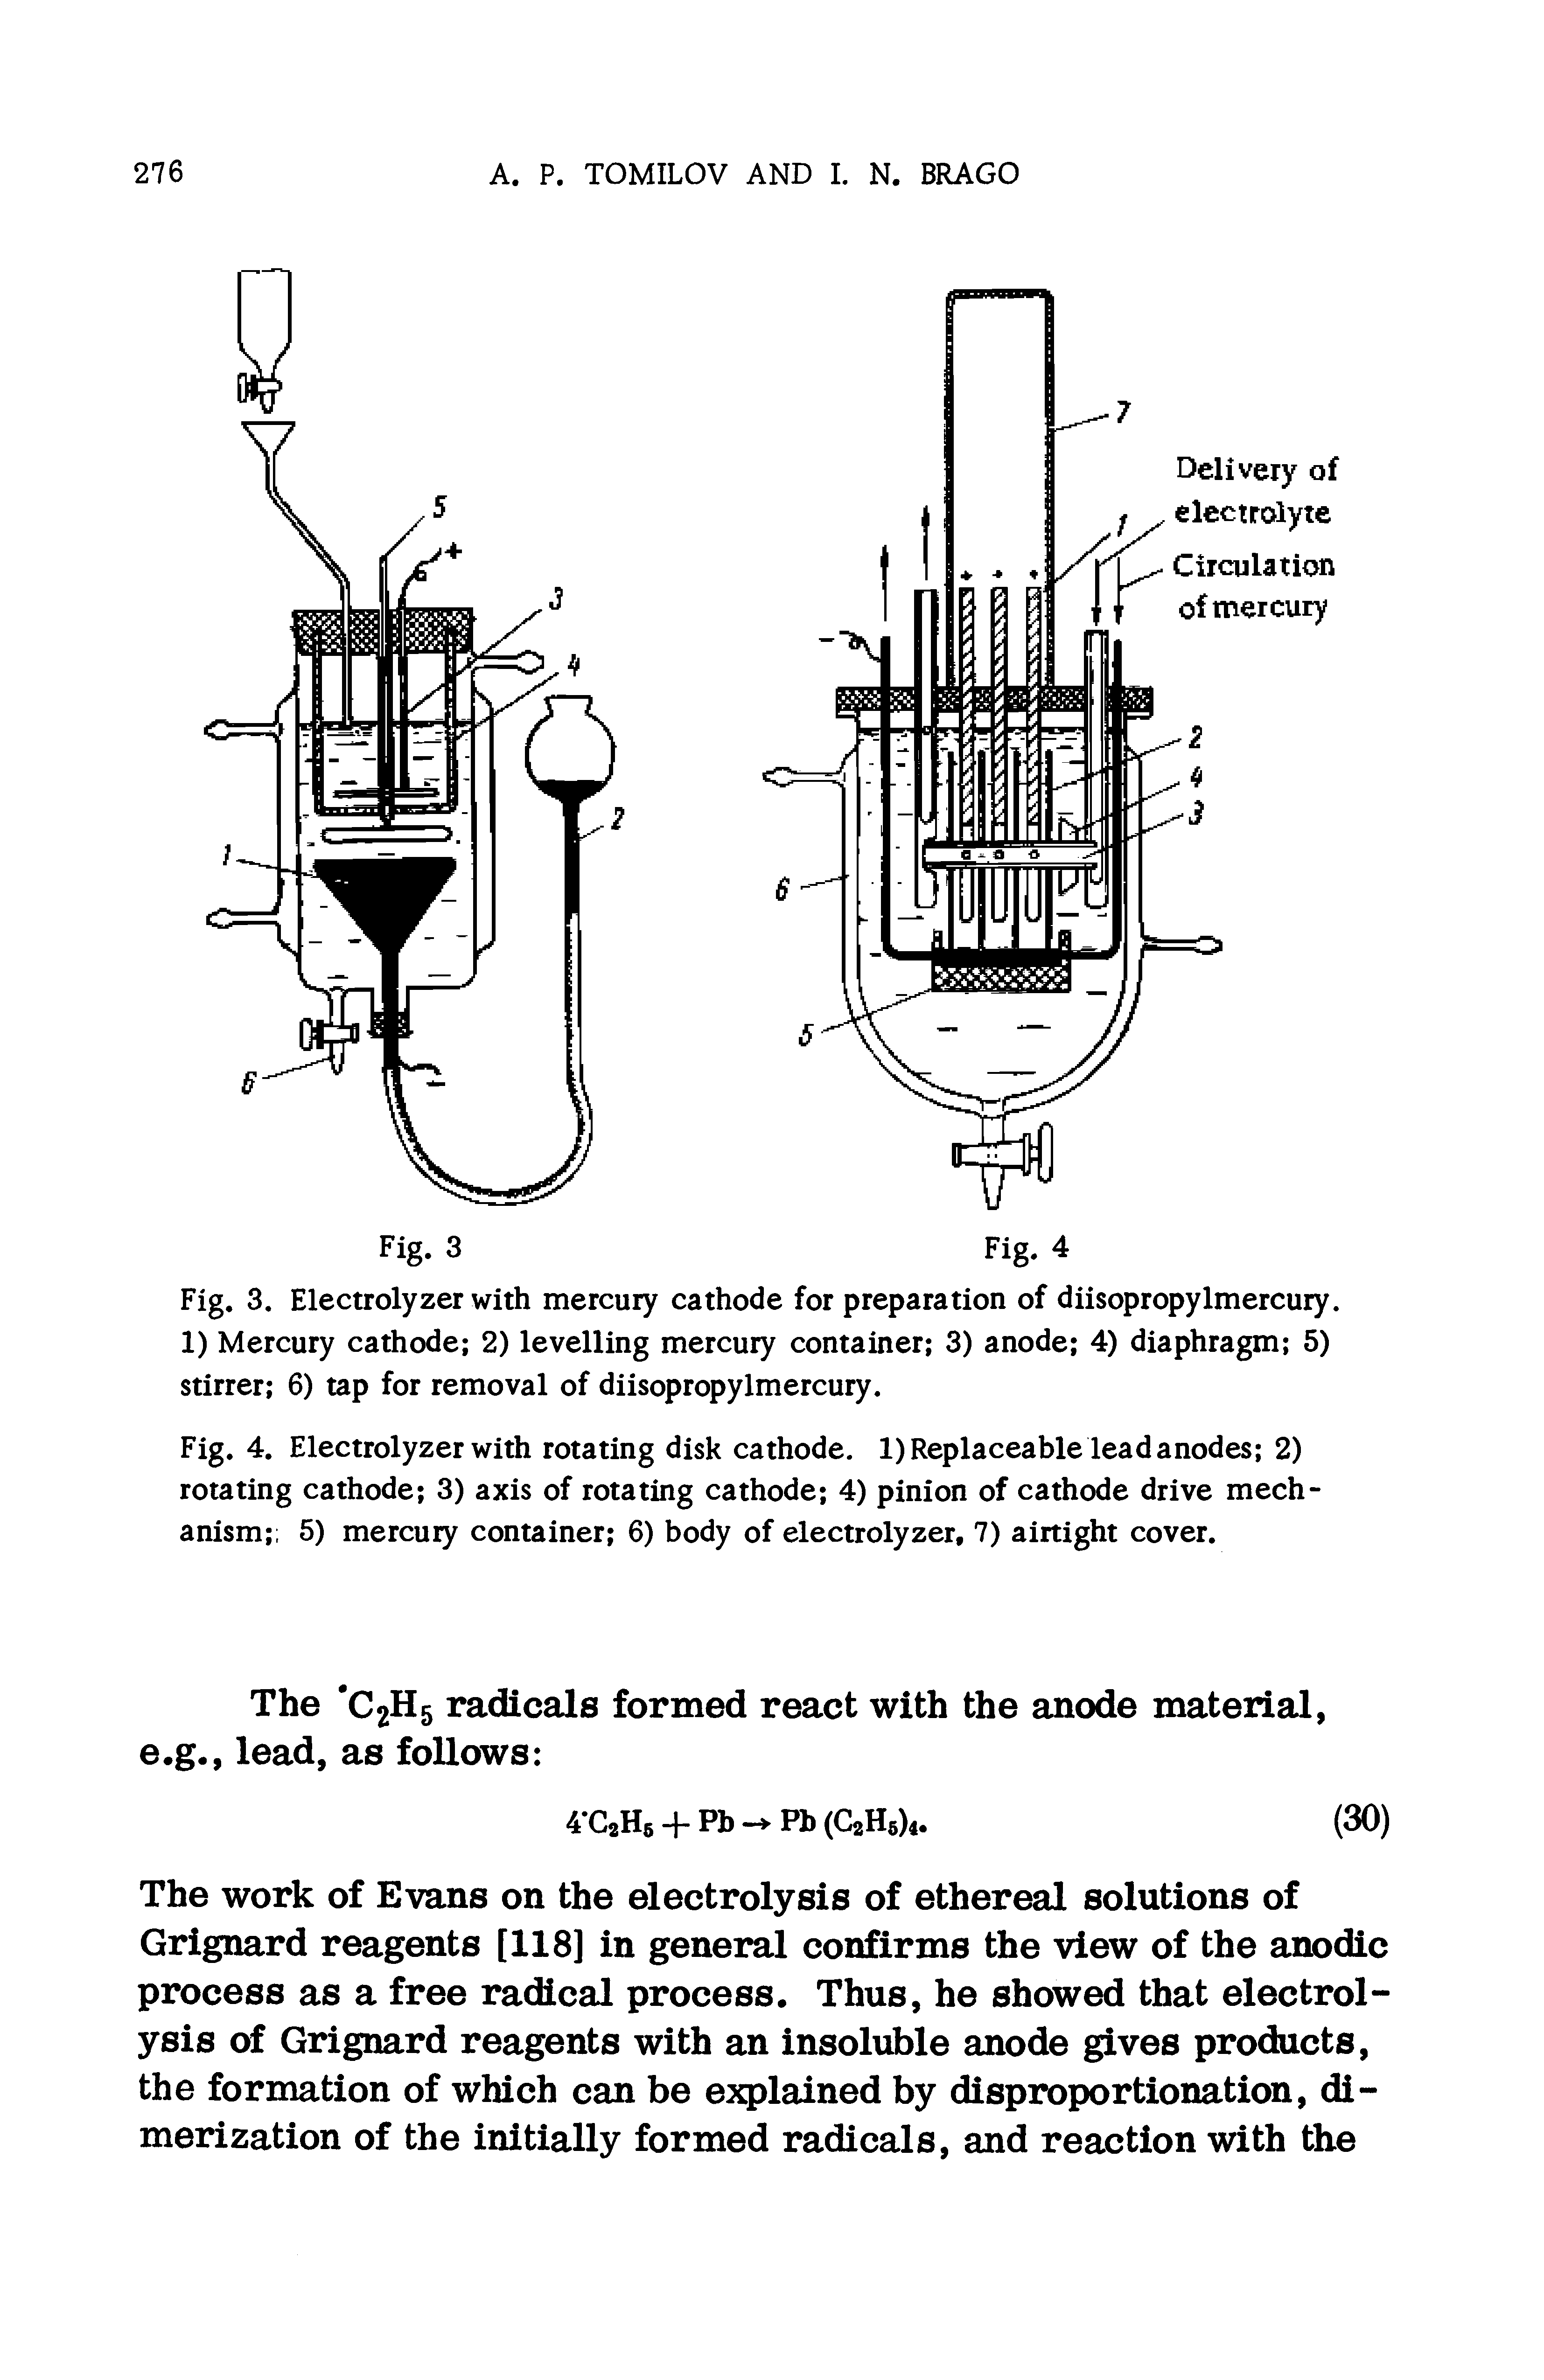 Fig. 4. Electrolyzer with rotating disk cathode. 1) Replaceable lead anodes 2) rotating cathode 3) axis of rotating cathode 4) pinion of cathode drive mechanism 5) mercury container 6) body of electrolyzer, 7) airtight cover.